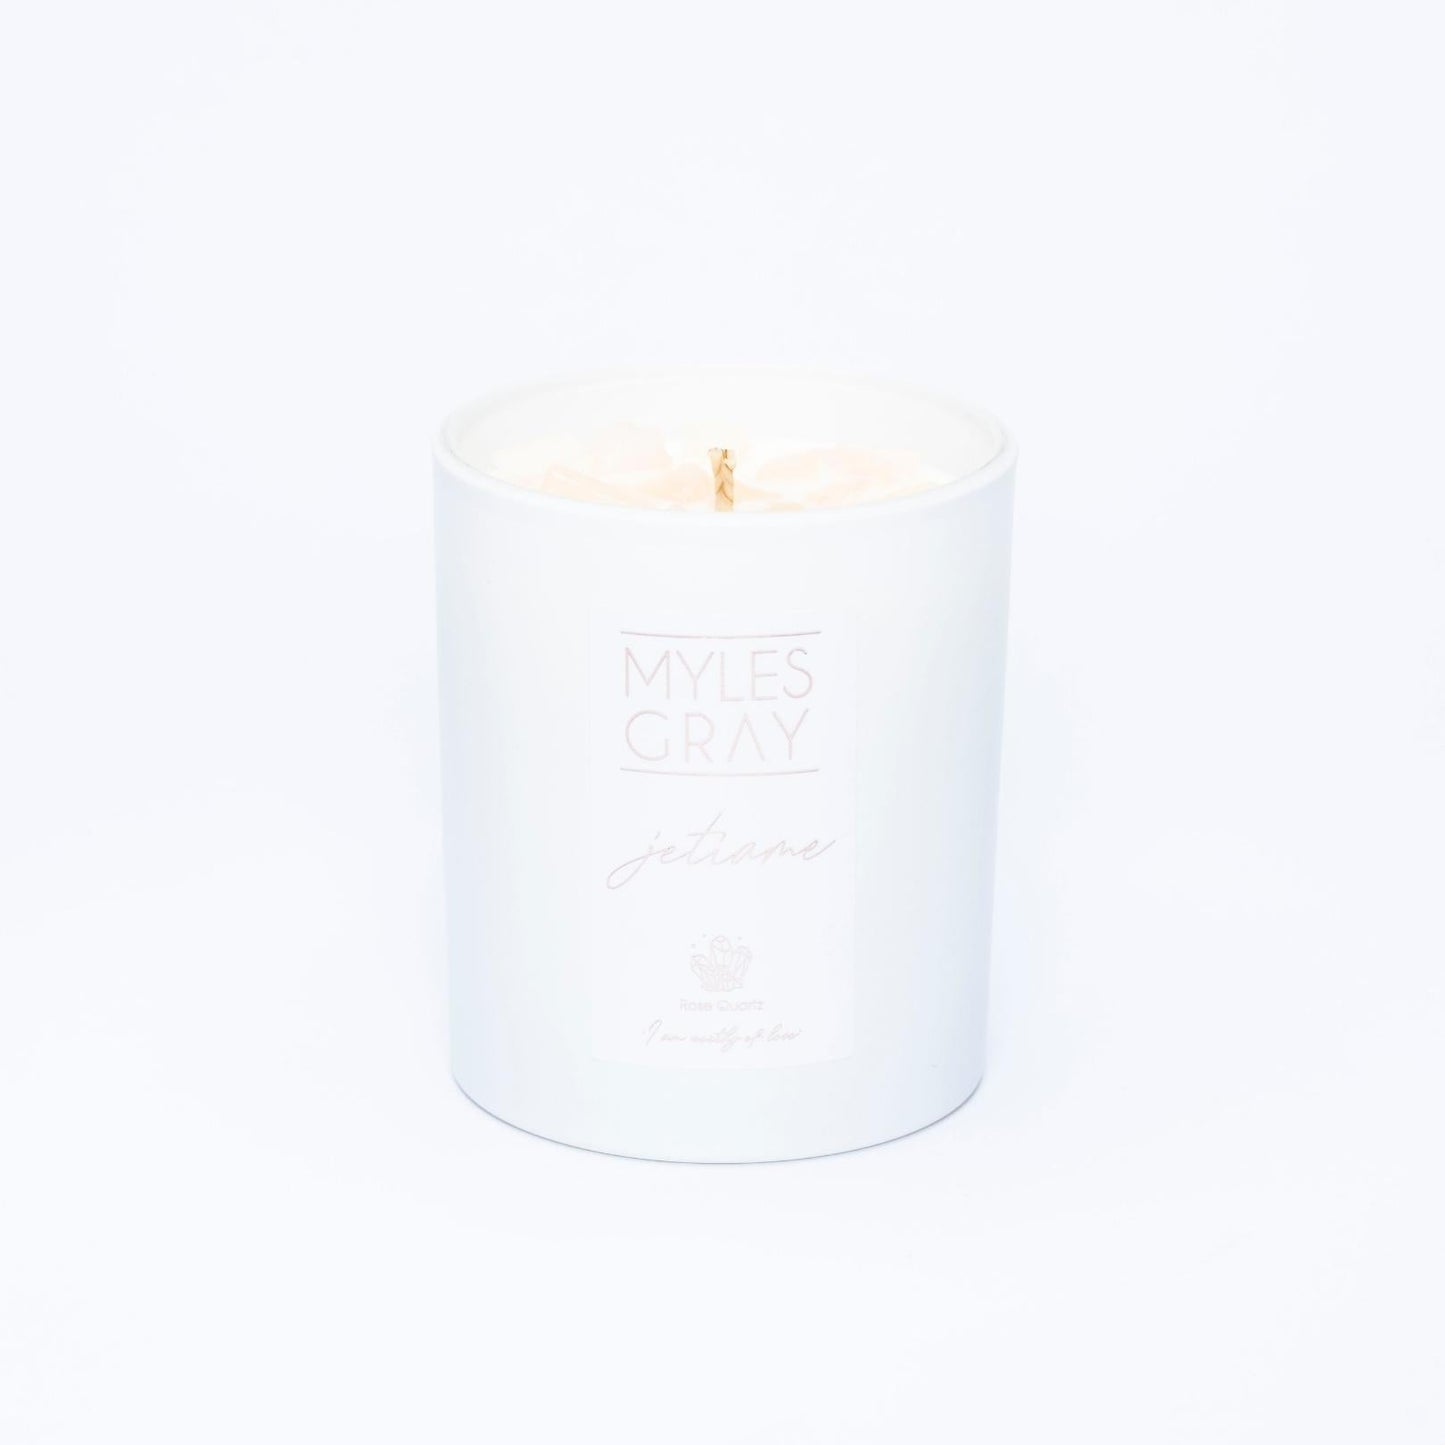 Je t'aime | The Candle of Love - Myles Gray